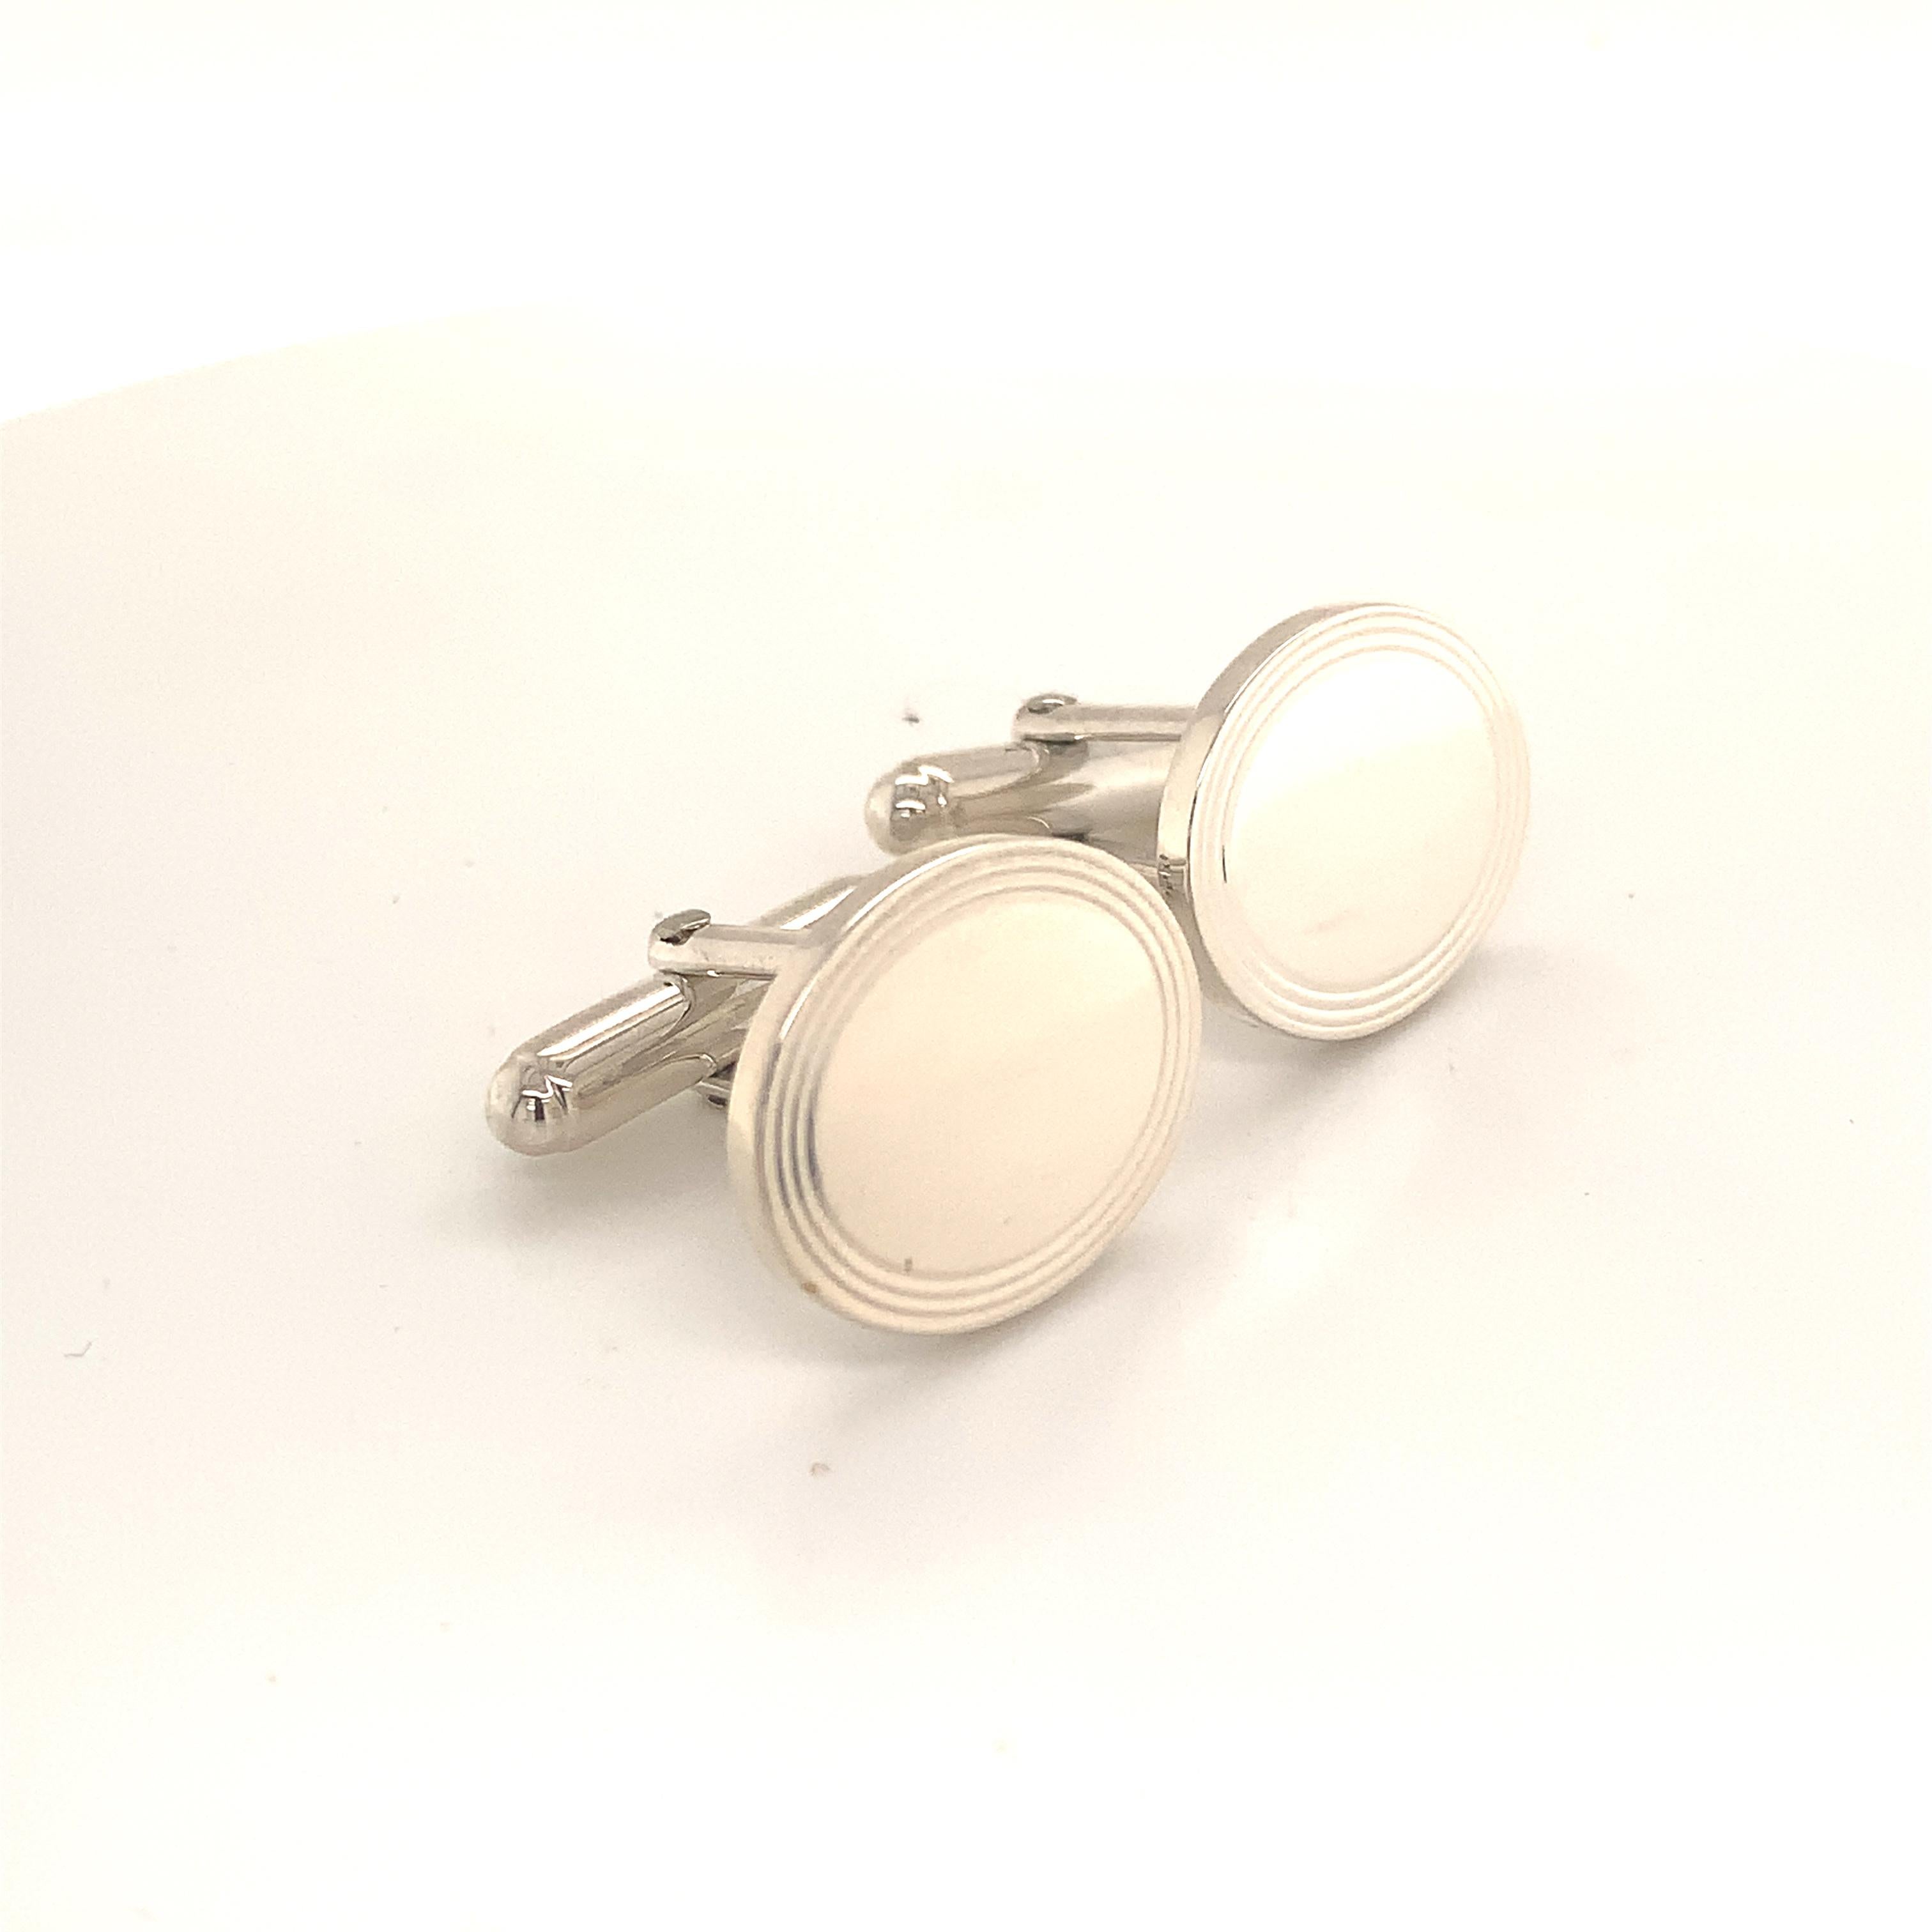 Tiffany & Co. Estate Sterling Silver Cufflinks 12.4 Grams In Good Condition For Sale In Brooklyn, NY